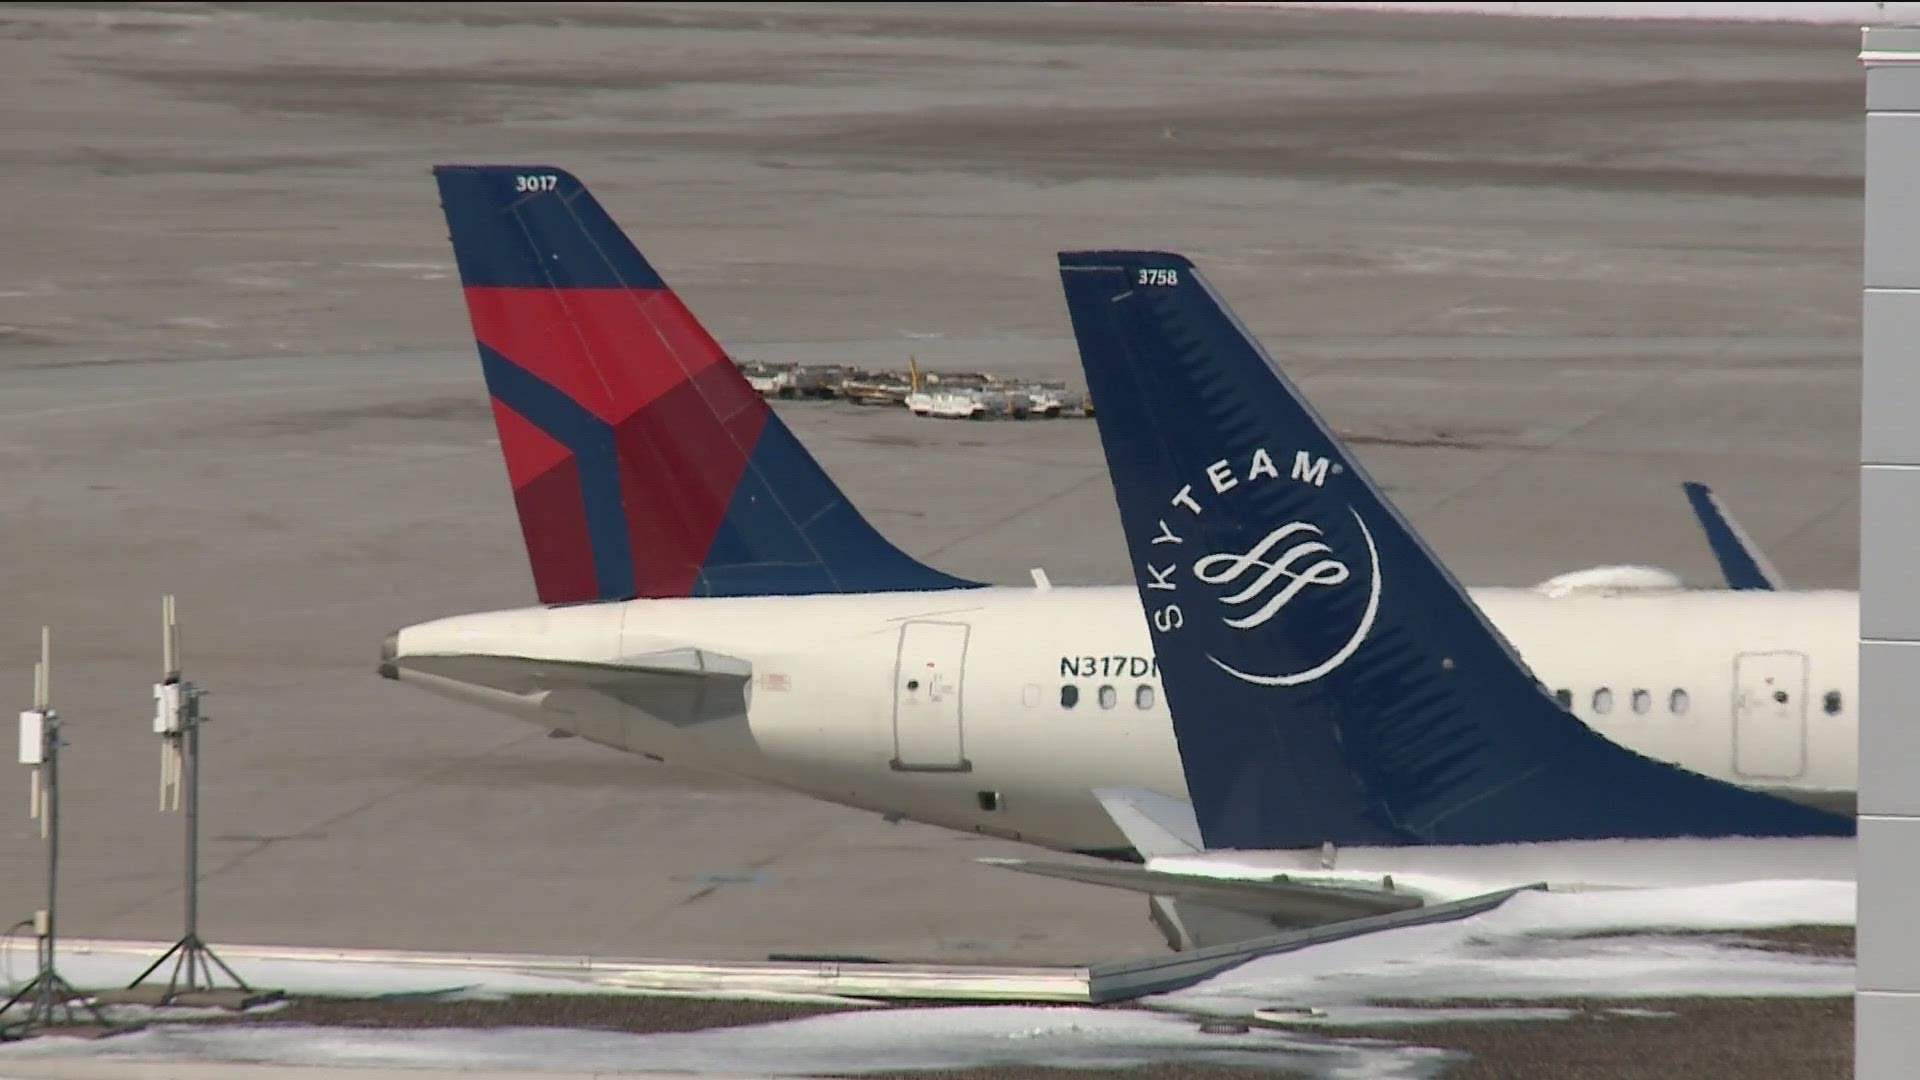 Two Delta planes on a taxiway at MSP Airport clipped wings Thursday morning, forcing both planes to return to their gates. No one was hurt.